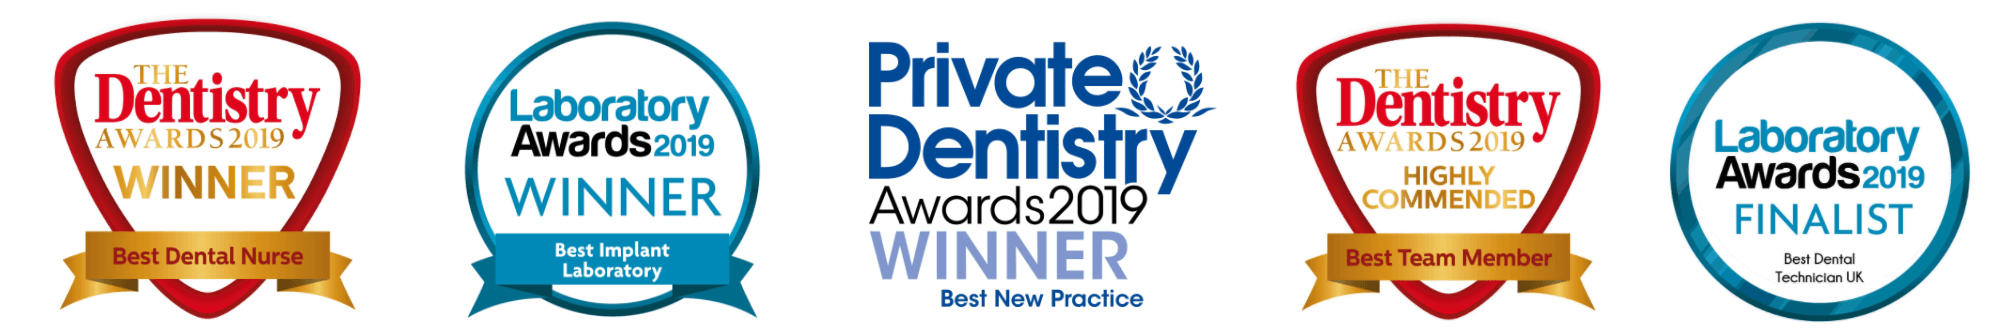 private dentistry awards winners